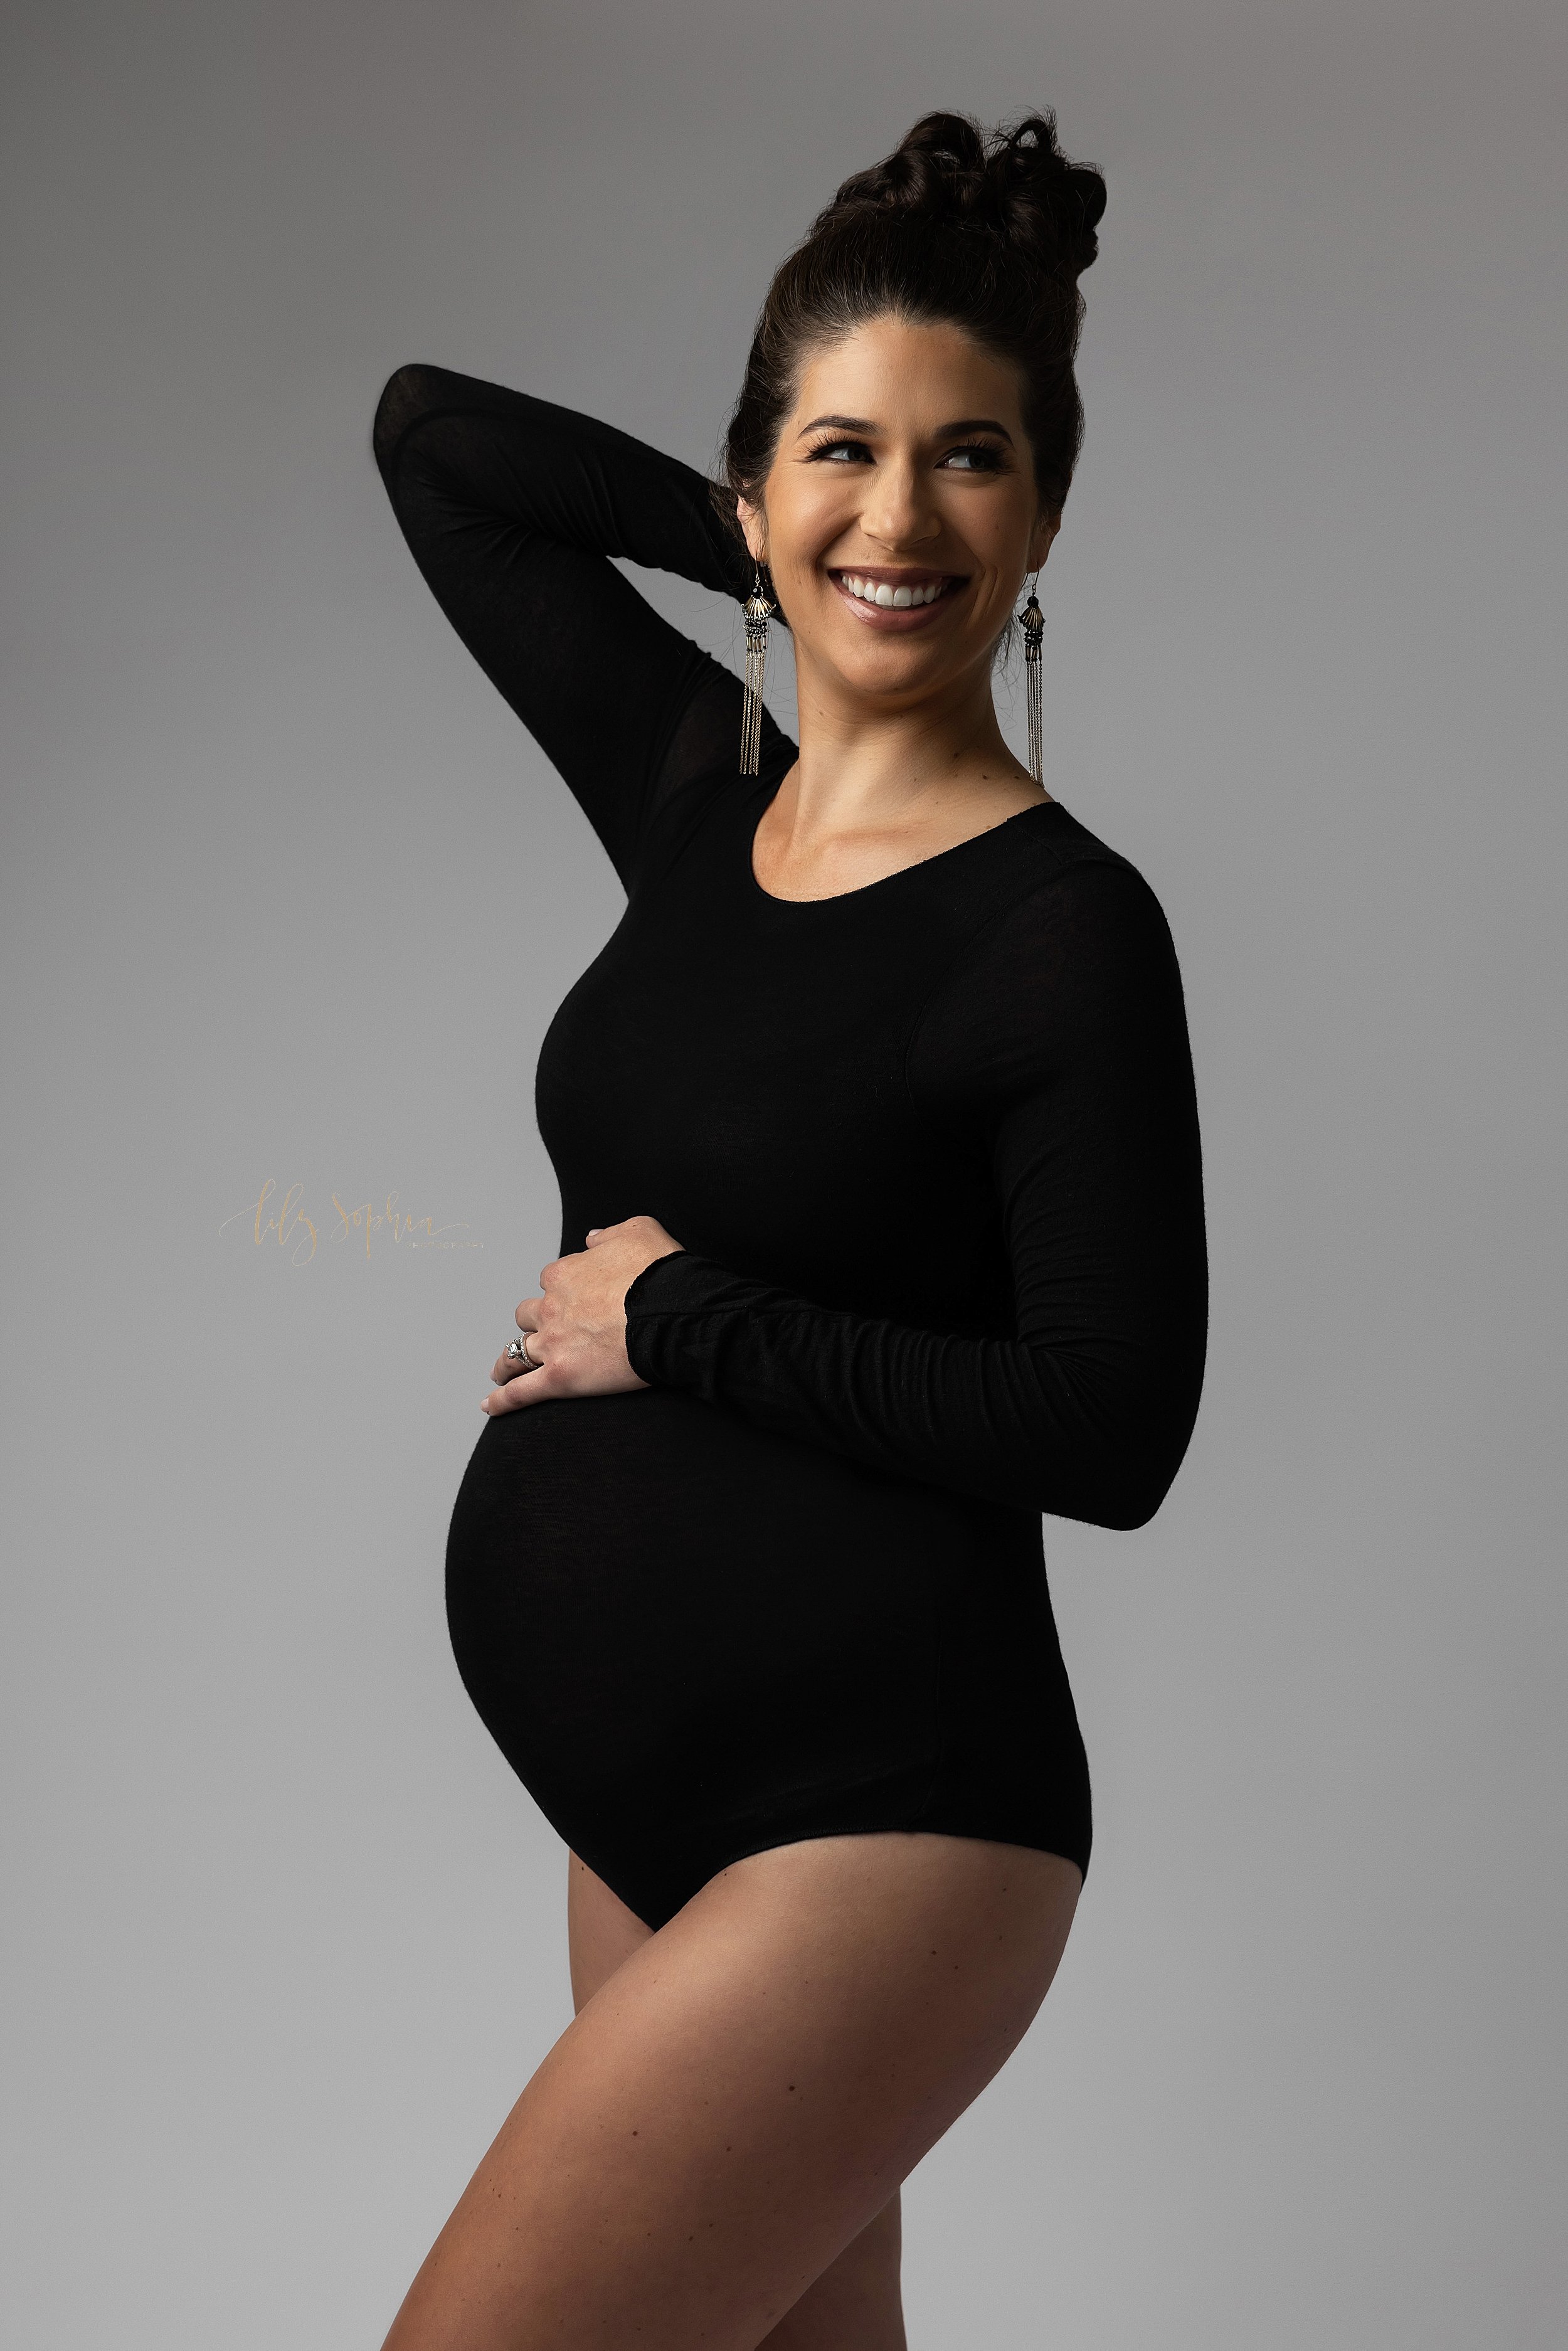  Modern maternity photoshoot of an expectant mother as she celebrates being pregnant while wearing a black scoop necked long sleeved body suit and places her left hand on top of her belly while placing her right hand behind her head as she turns to l